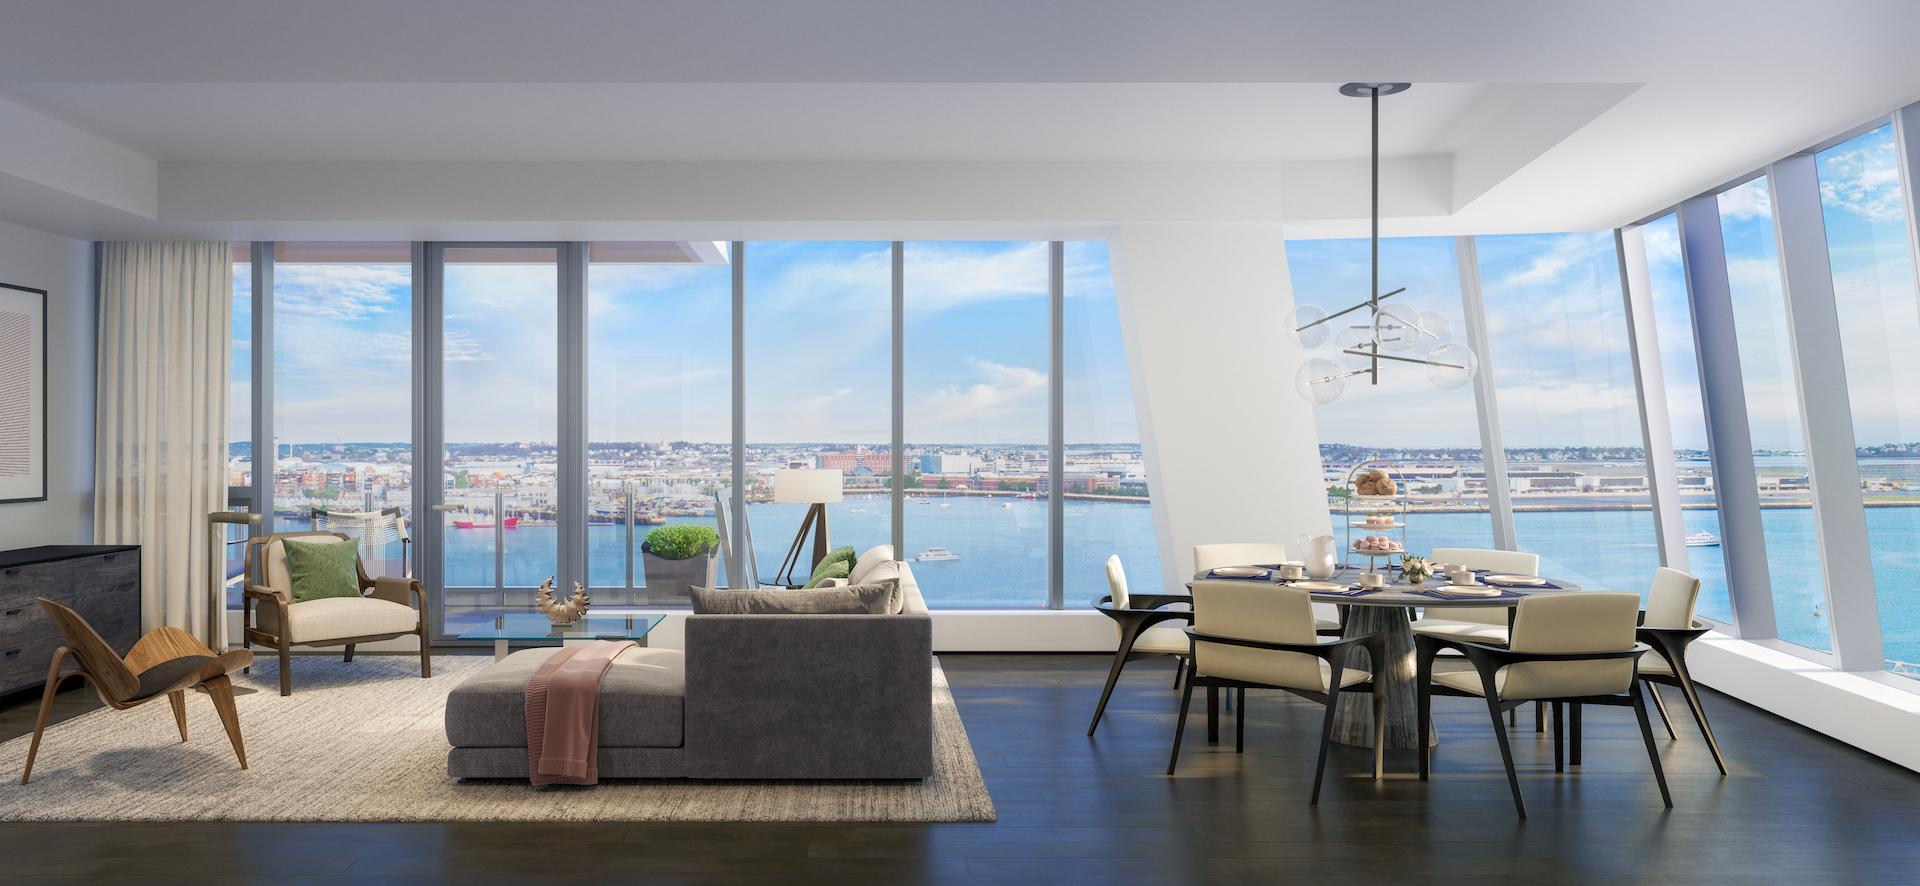 St. Regis Residences in Boston Offers Exquisite Waterfront Living 